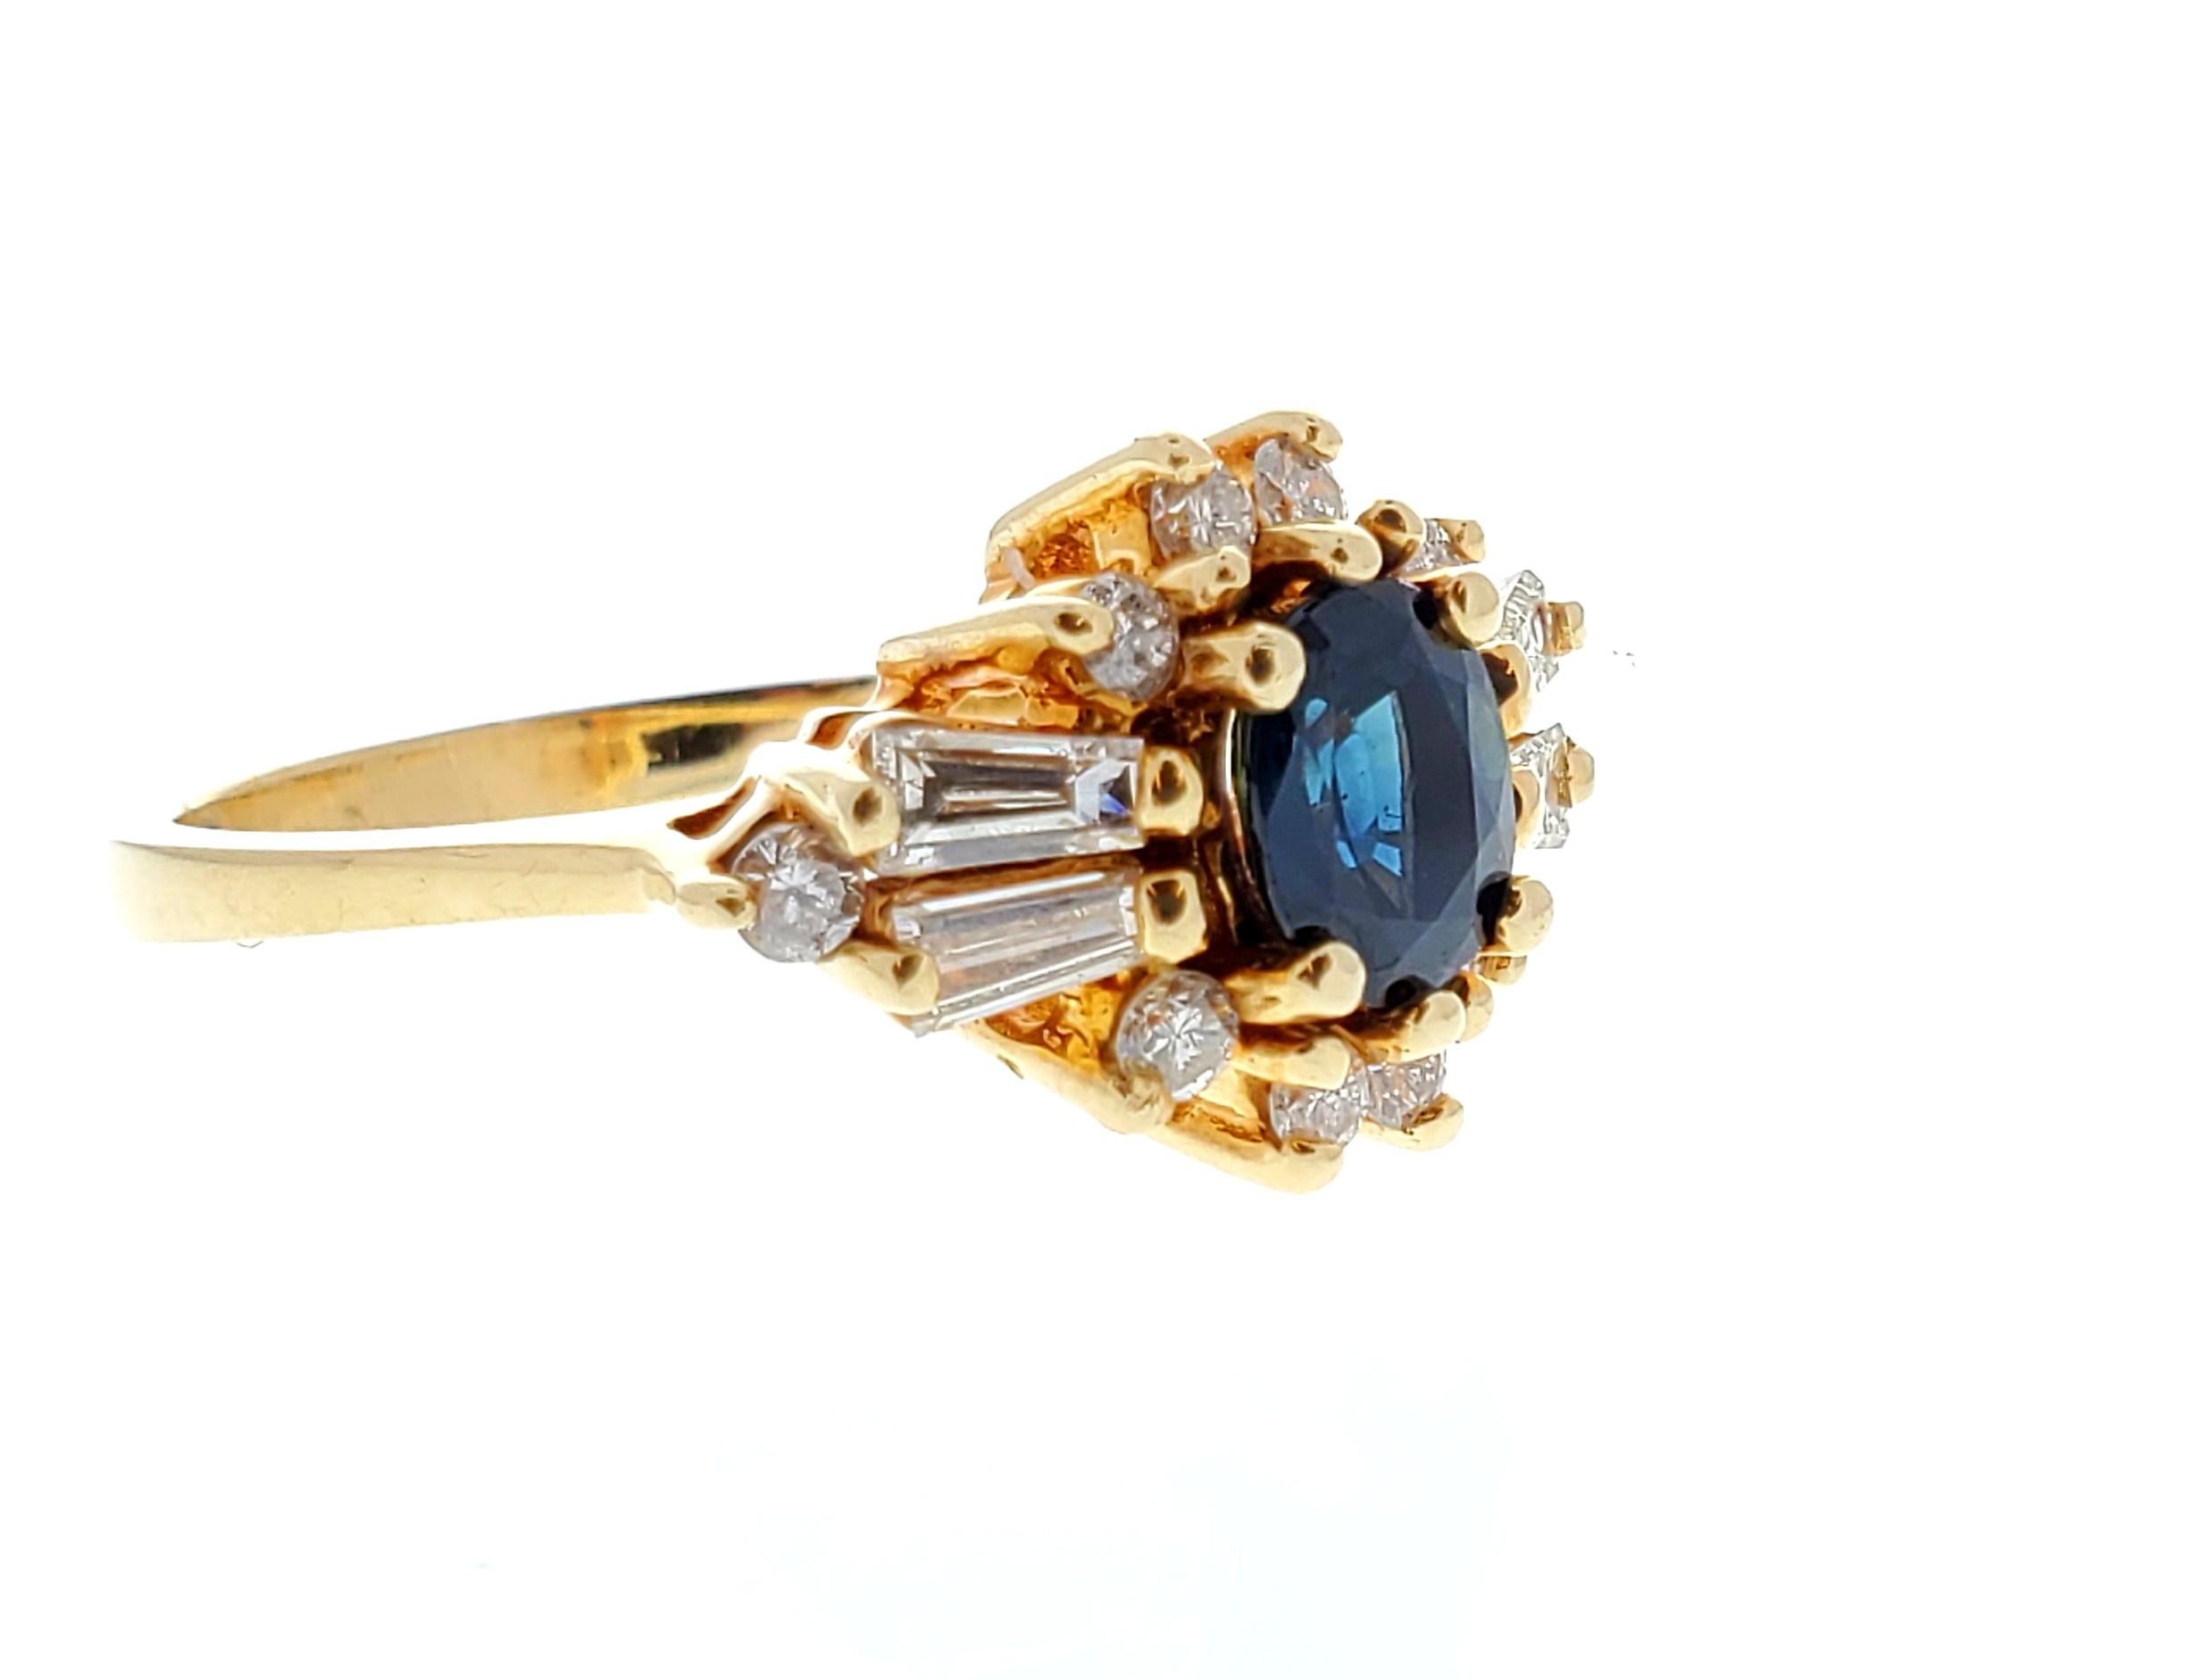 Designed in brightly polished 14 karat yellow gold, this beautiful diamond and sapphire ring features a center-set oval cut 1.00 carat sapphire that exhibits an intense blue color with overall good saturation. This sapphire is complemented 0.70